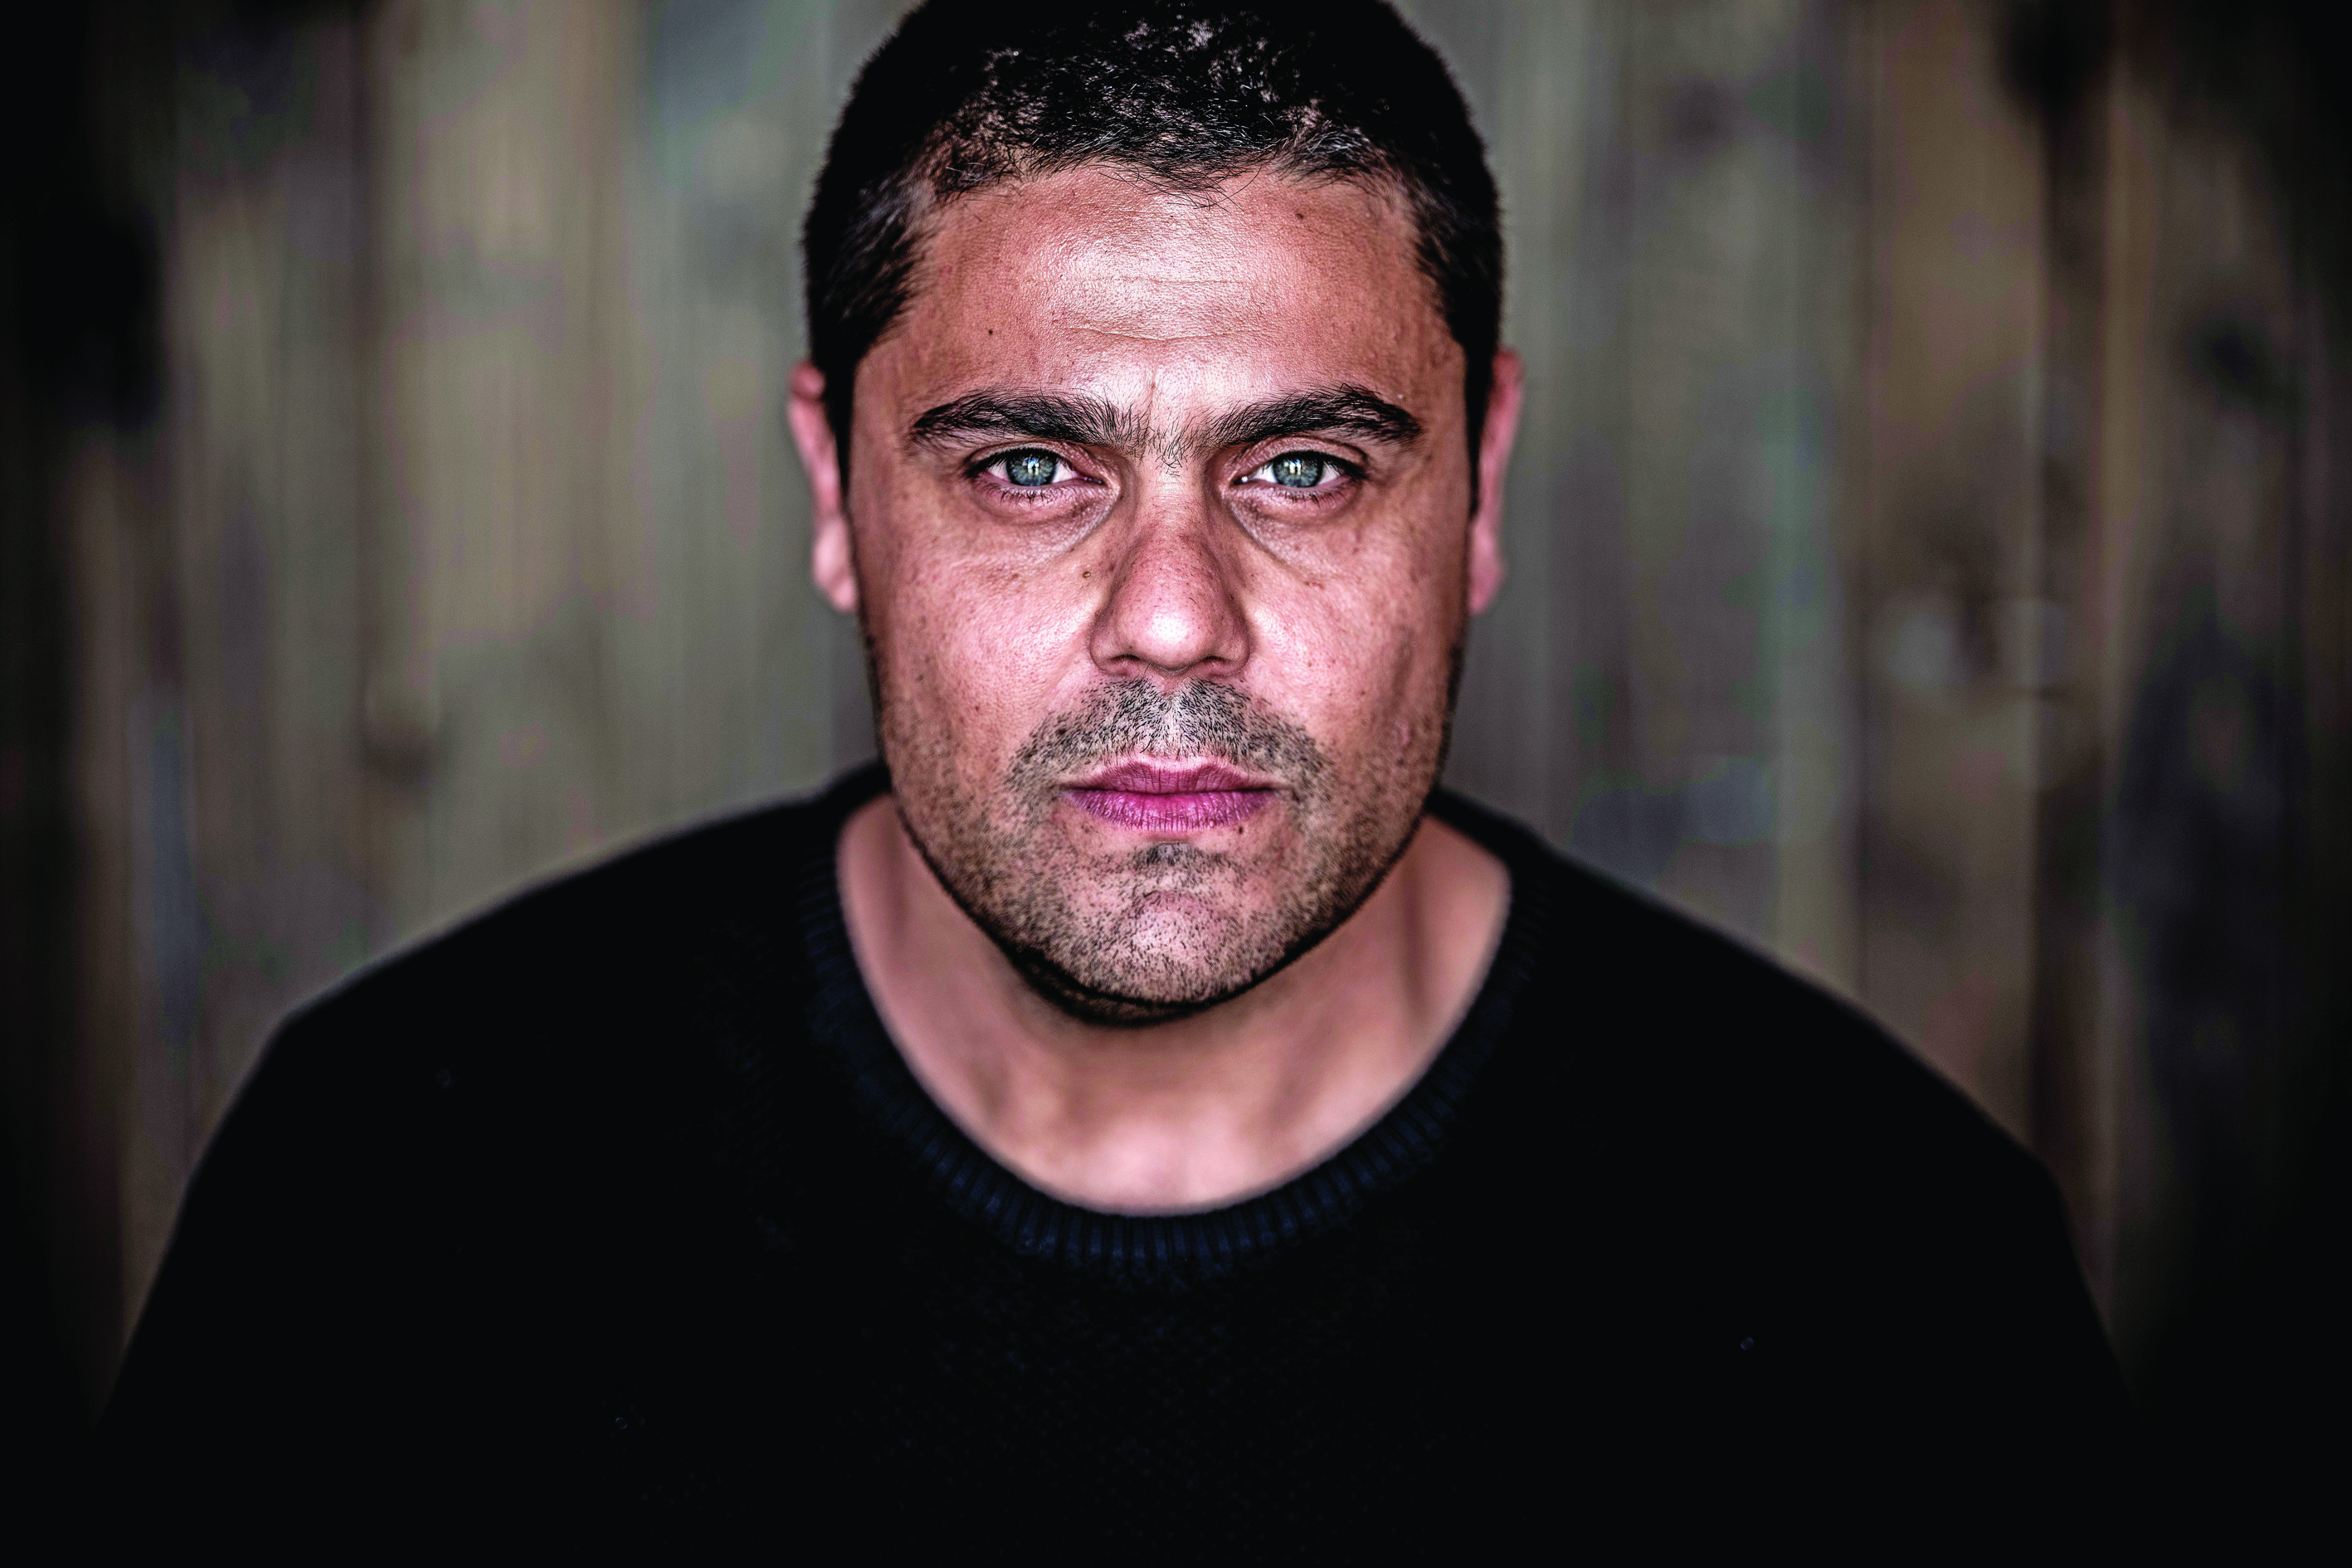 Dan Sultan appearing in Cairns - strictly limited tickets available